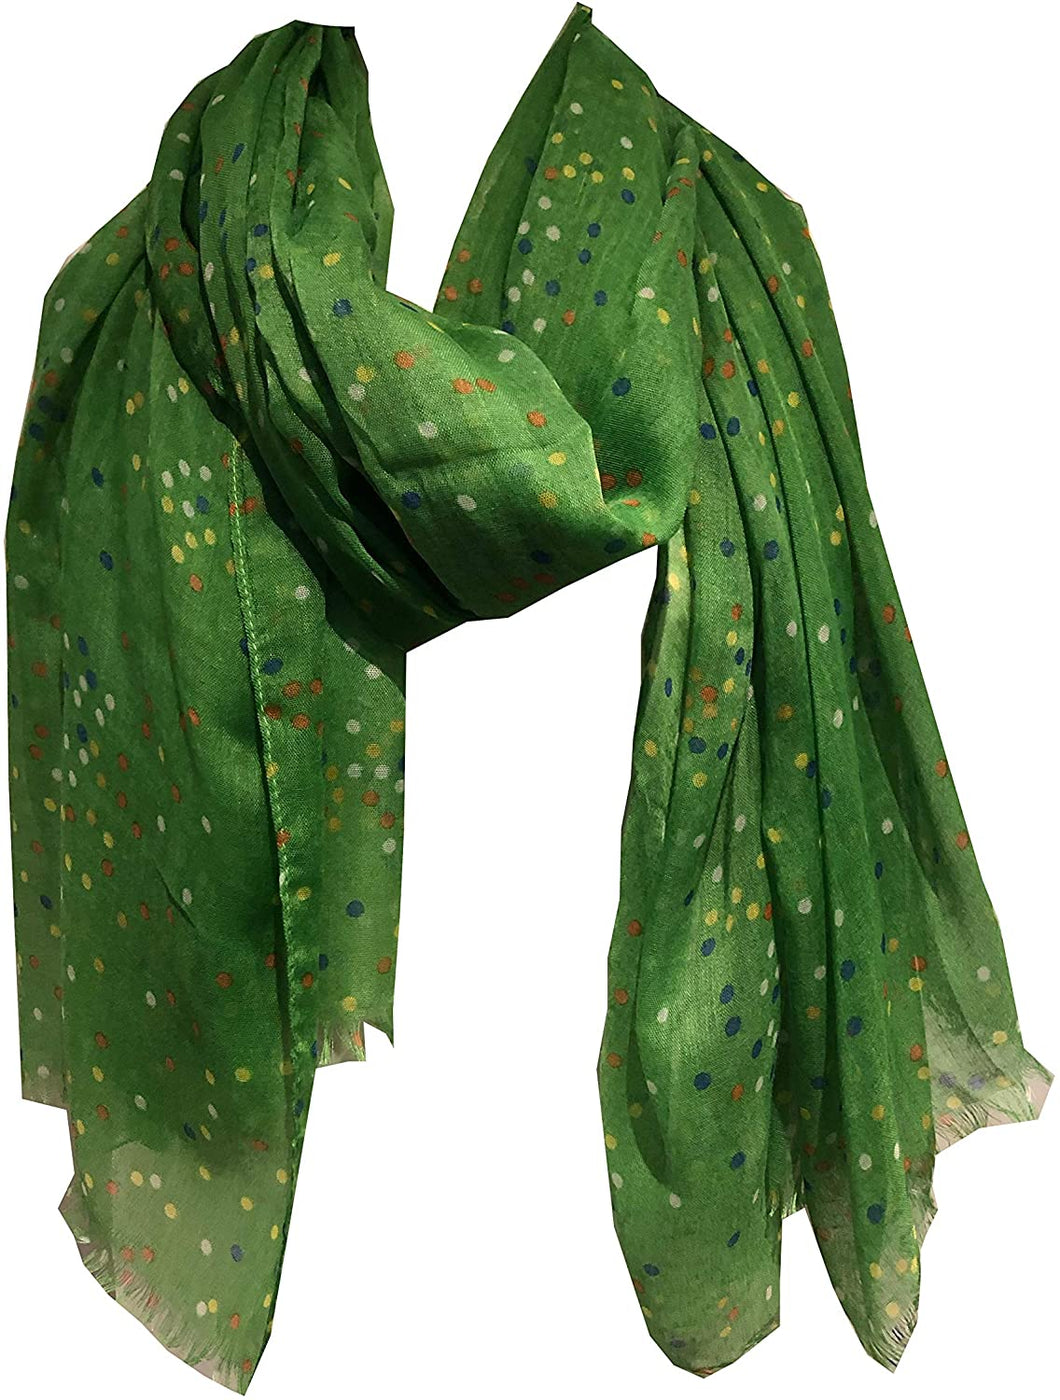 Pamper Yourself Now Bright Green with Multi Coloured dots Scarf/wrap